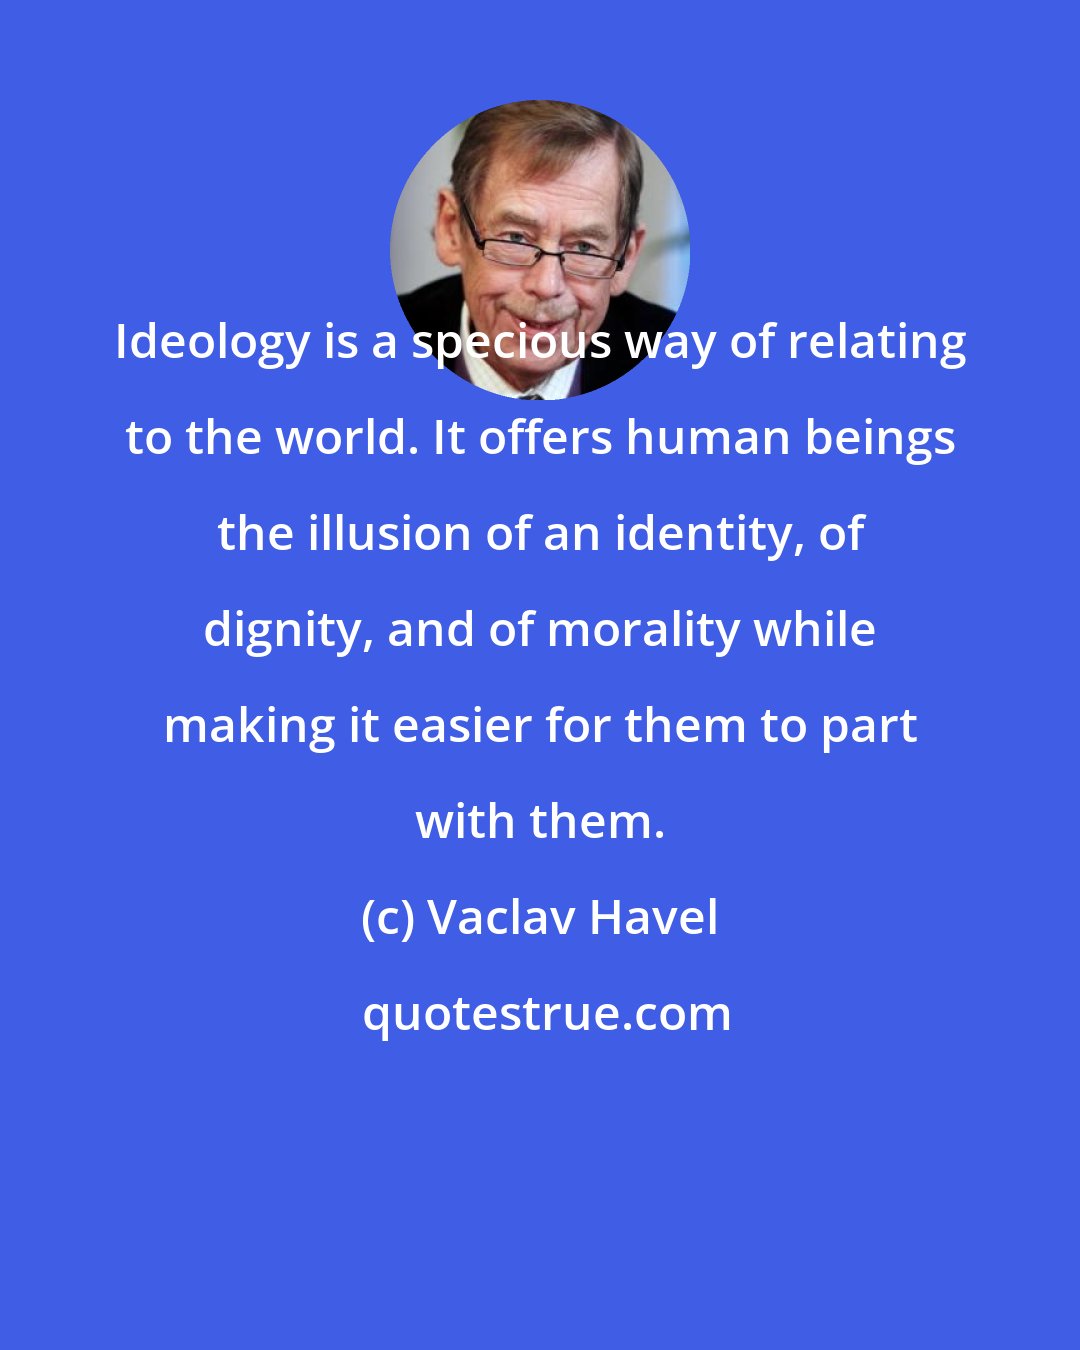 Vaclav Havel: Ideology is a specious way of relating to the world. It offers human beings the illusion of an identity, of dignity, and of morality while making it easier for them to part with them.